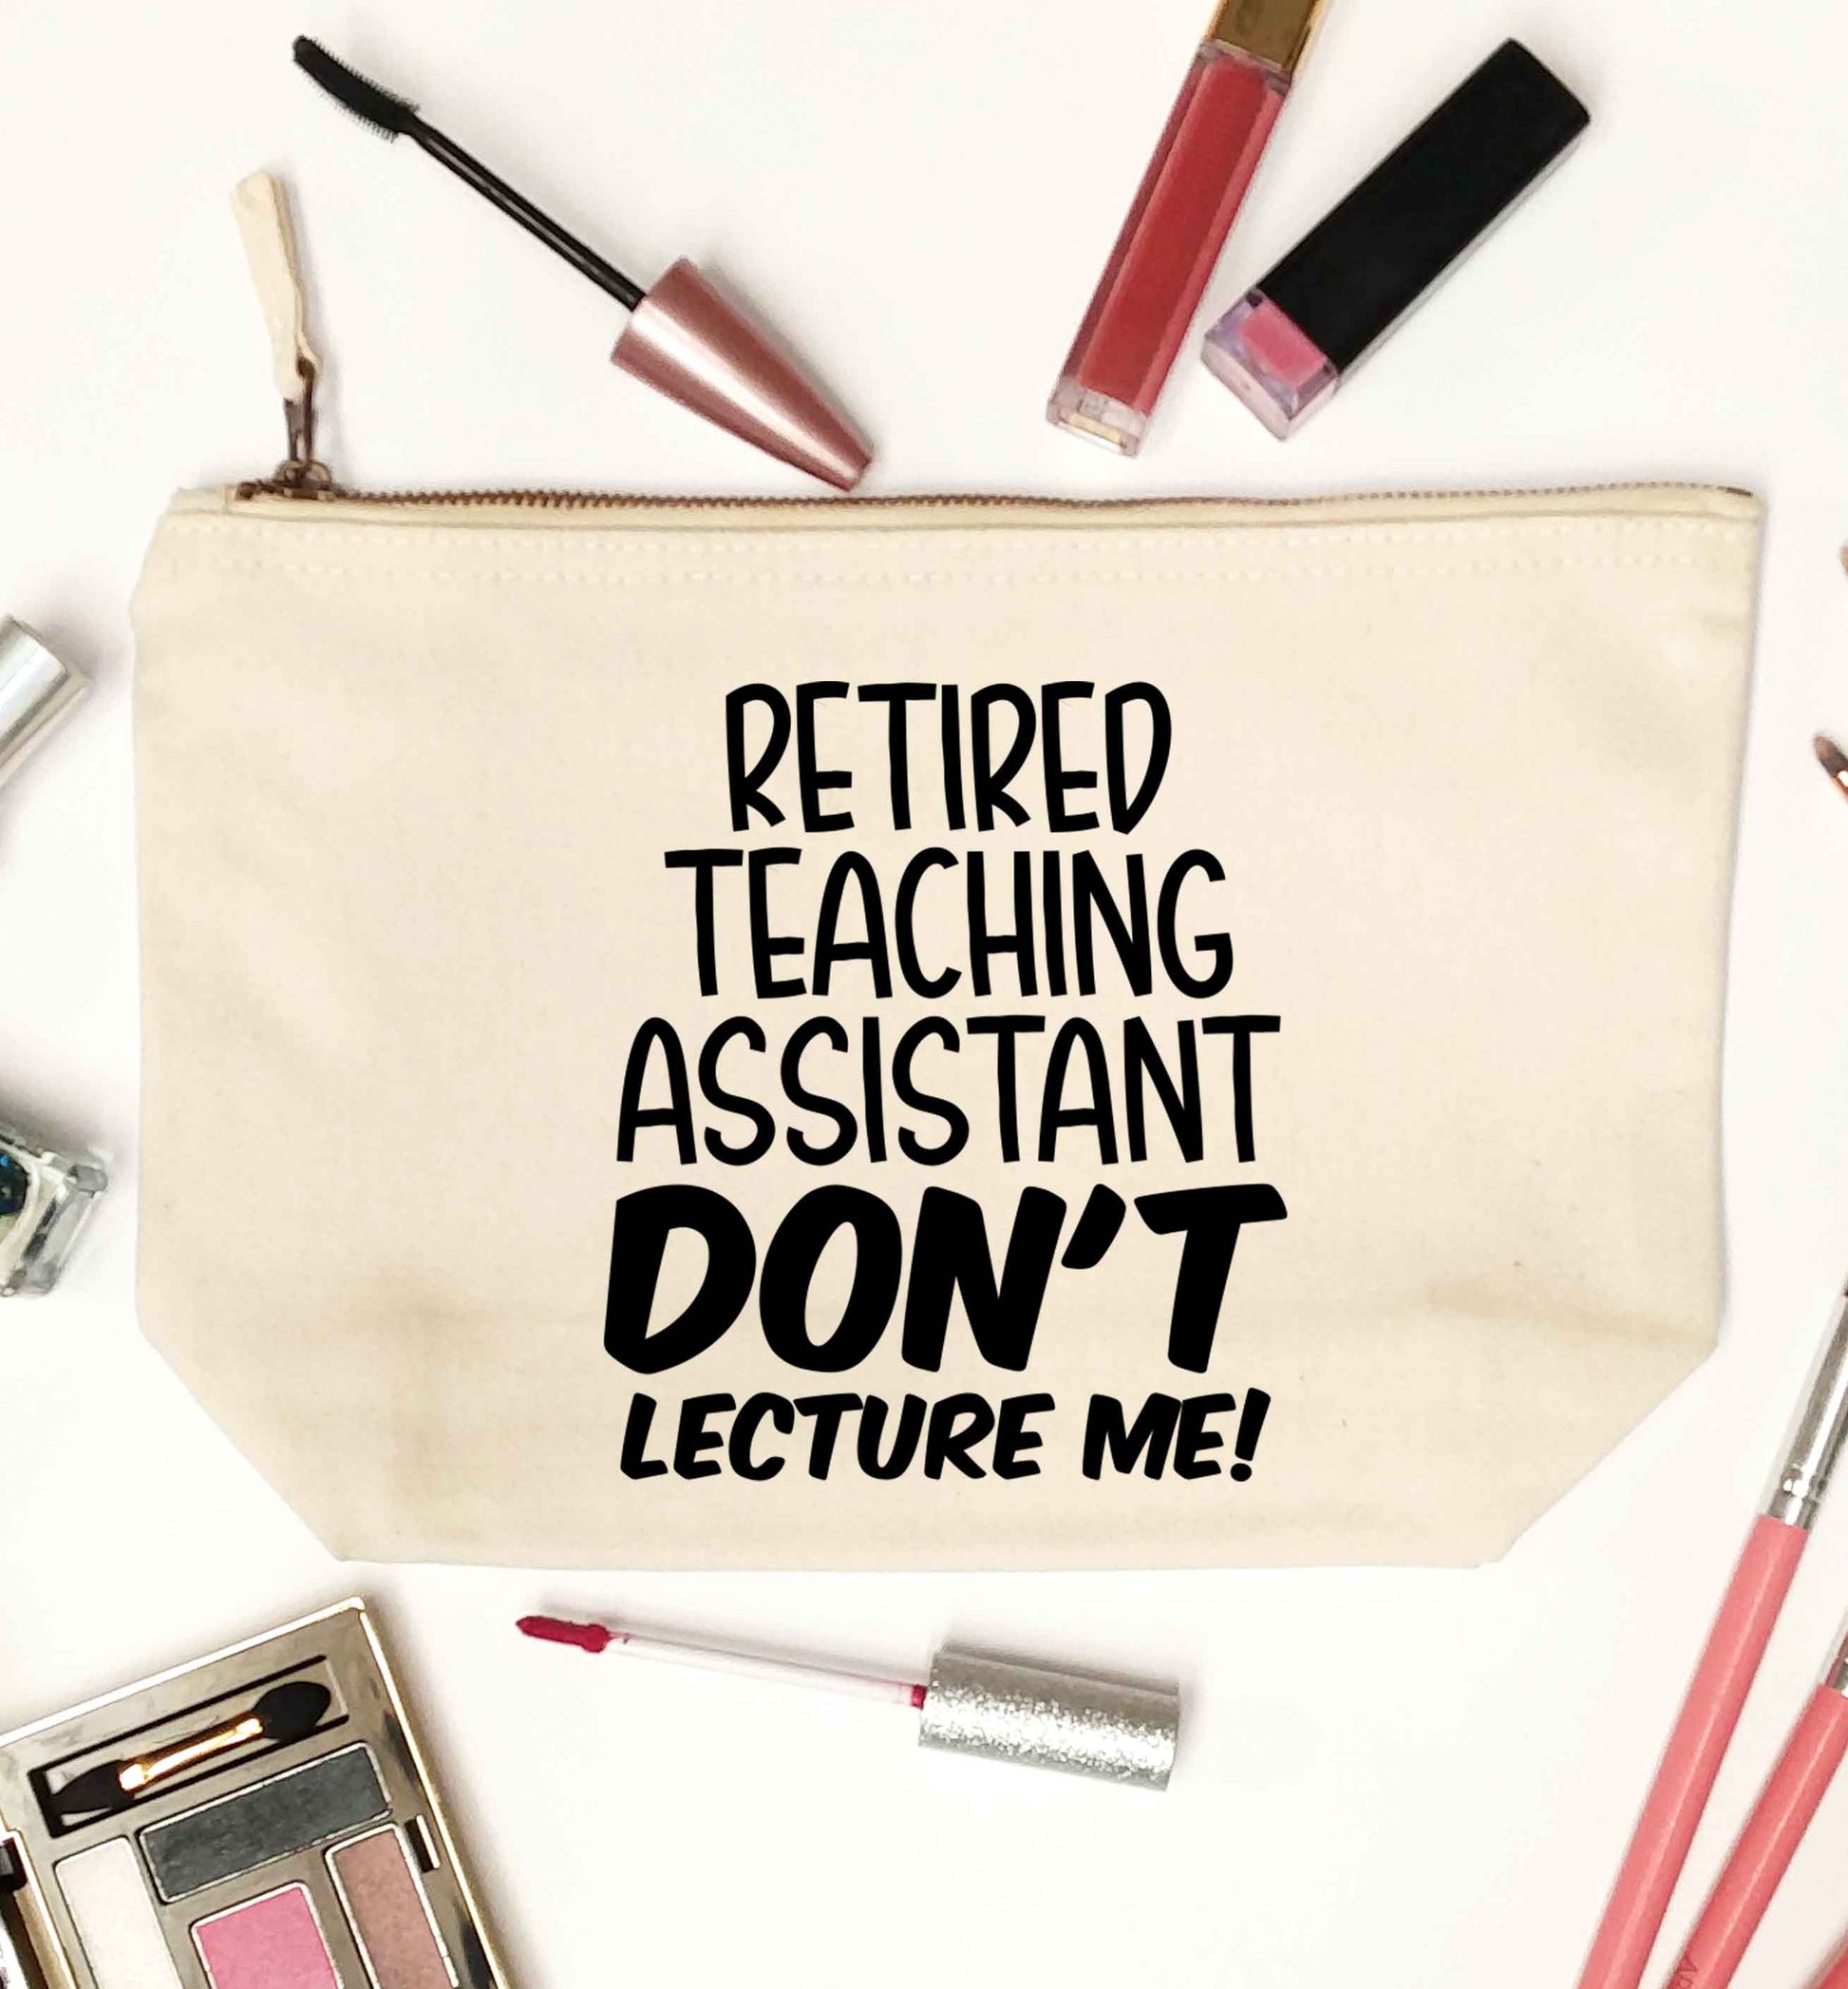 Retired teaching assistant don't lecture me natural makeup bag